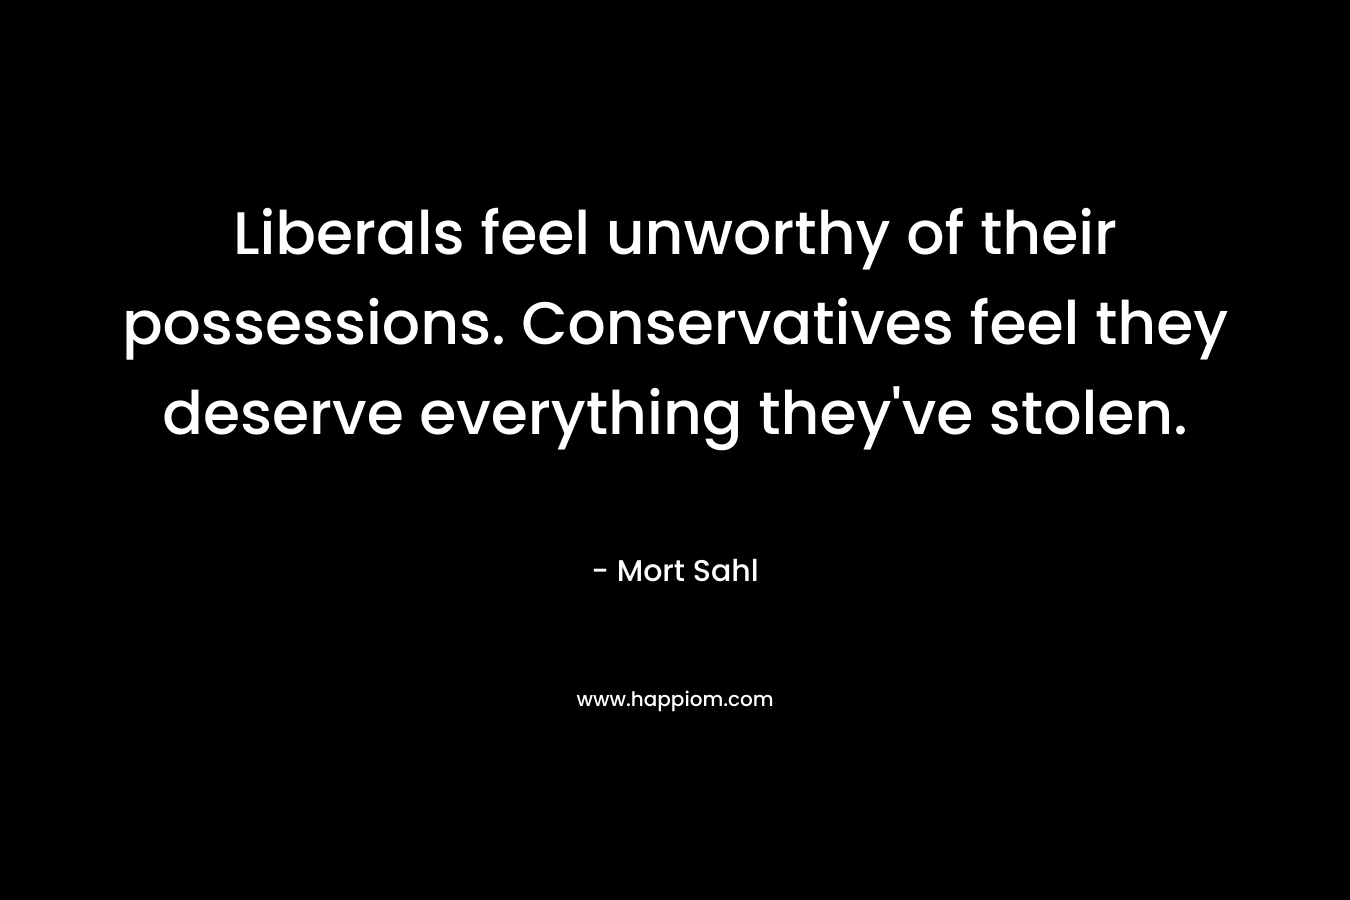 Liberals feel unworthy of their possessions. Conservatives feel they deserve everything they’ve stolen. – Mort Sahl